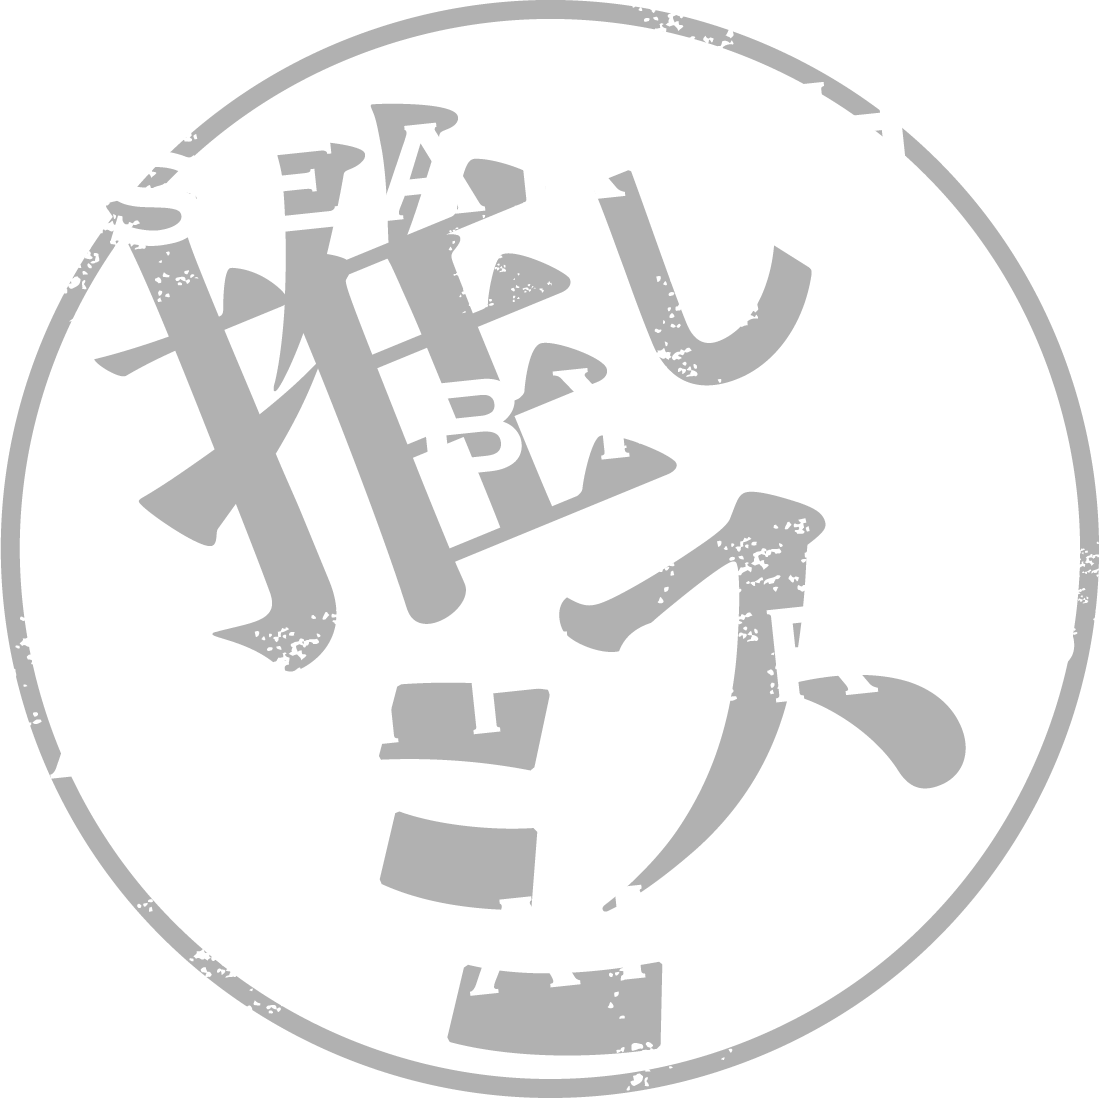 search by author's name